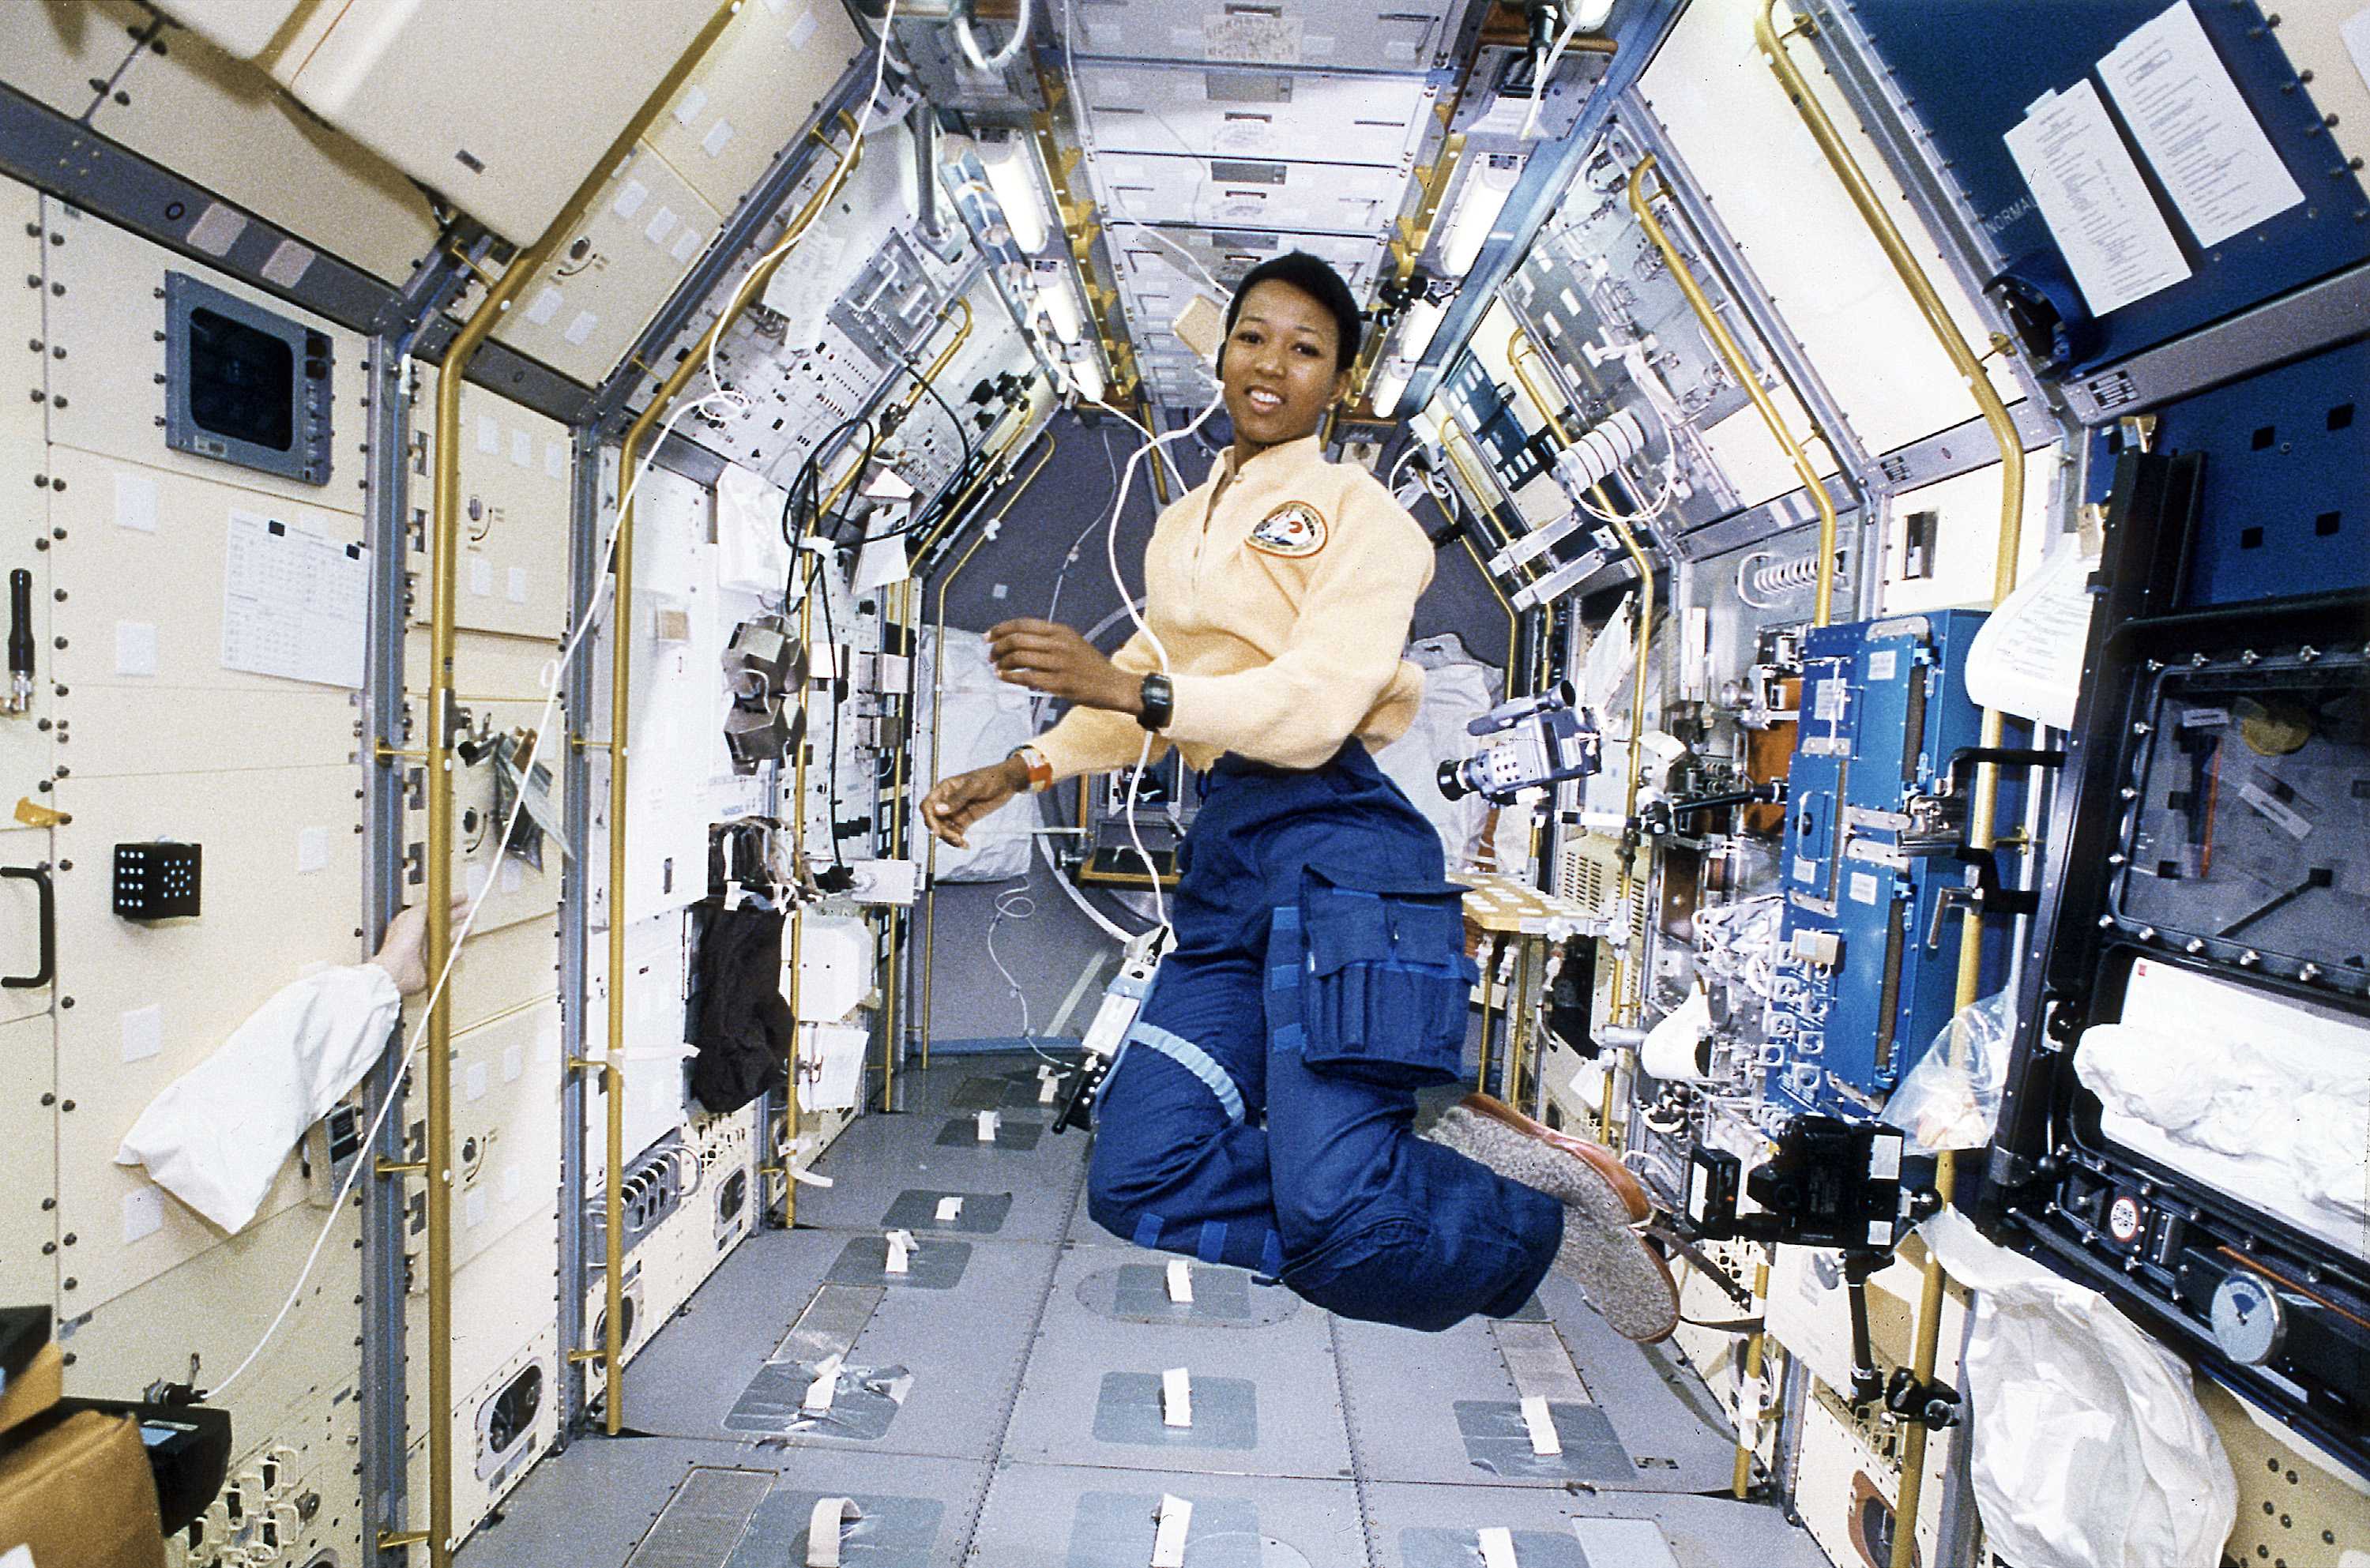 Astronaut Mae Jemison is onboard and floating inside a space craft. She is wearing a blue pants.